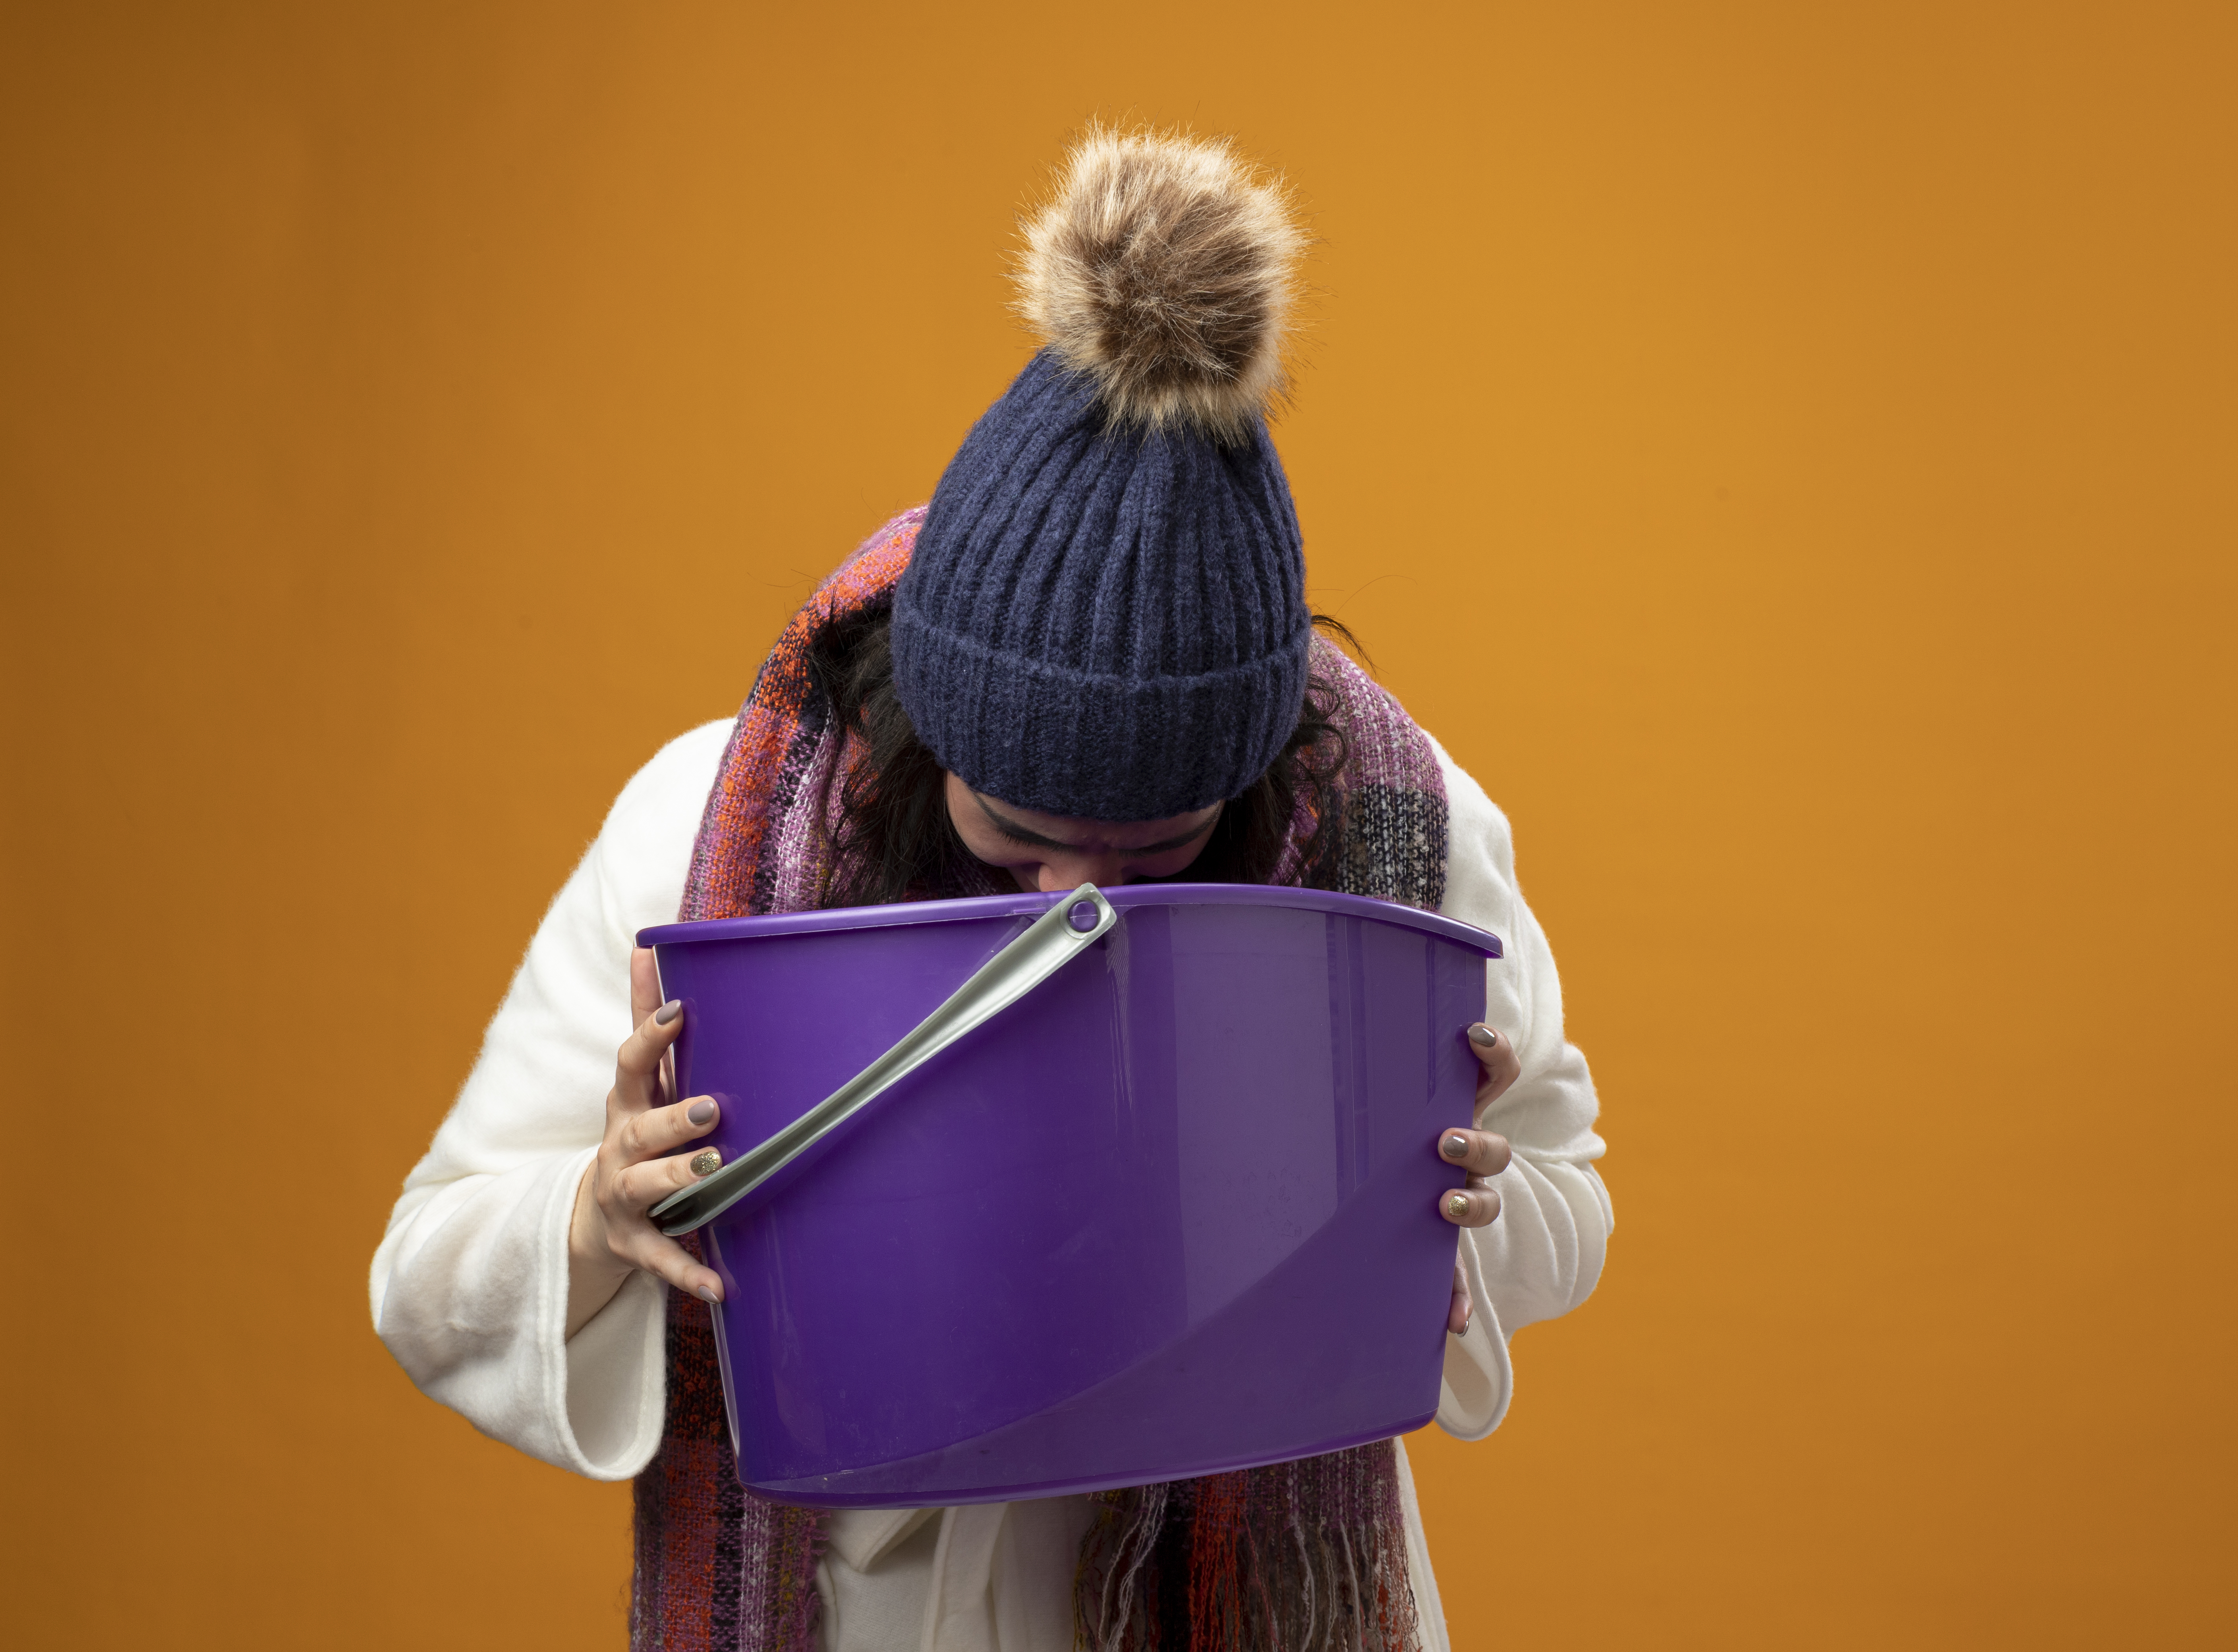 young-ill-woman-wearing-robe-winter-hat-scarf-having-nausea-holding-plastic-bucket-vomiting-into-it-isolated-orange-wall